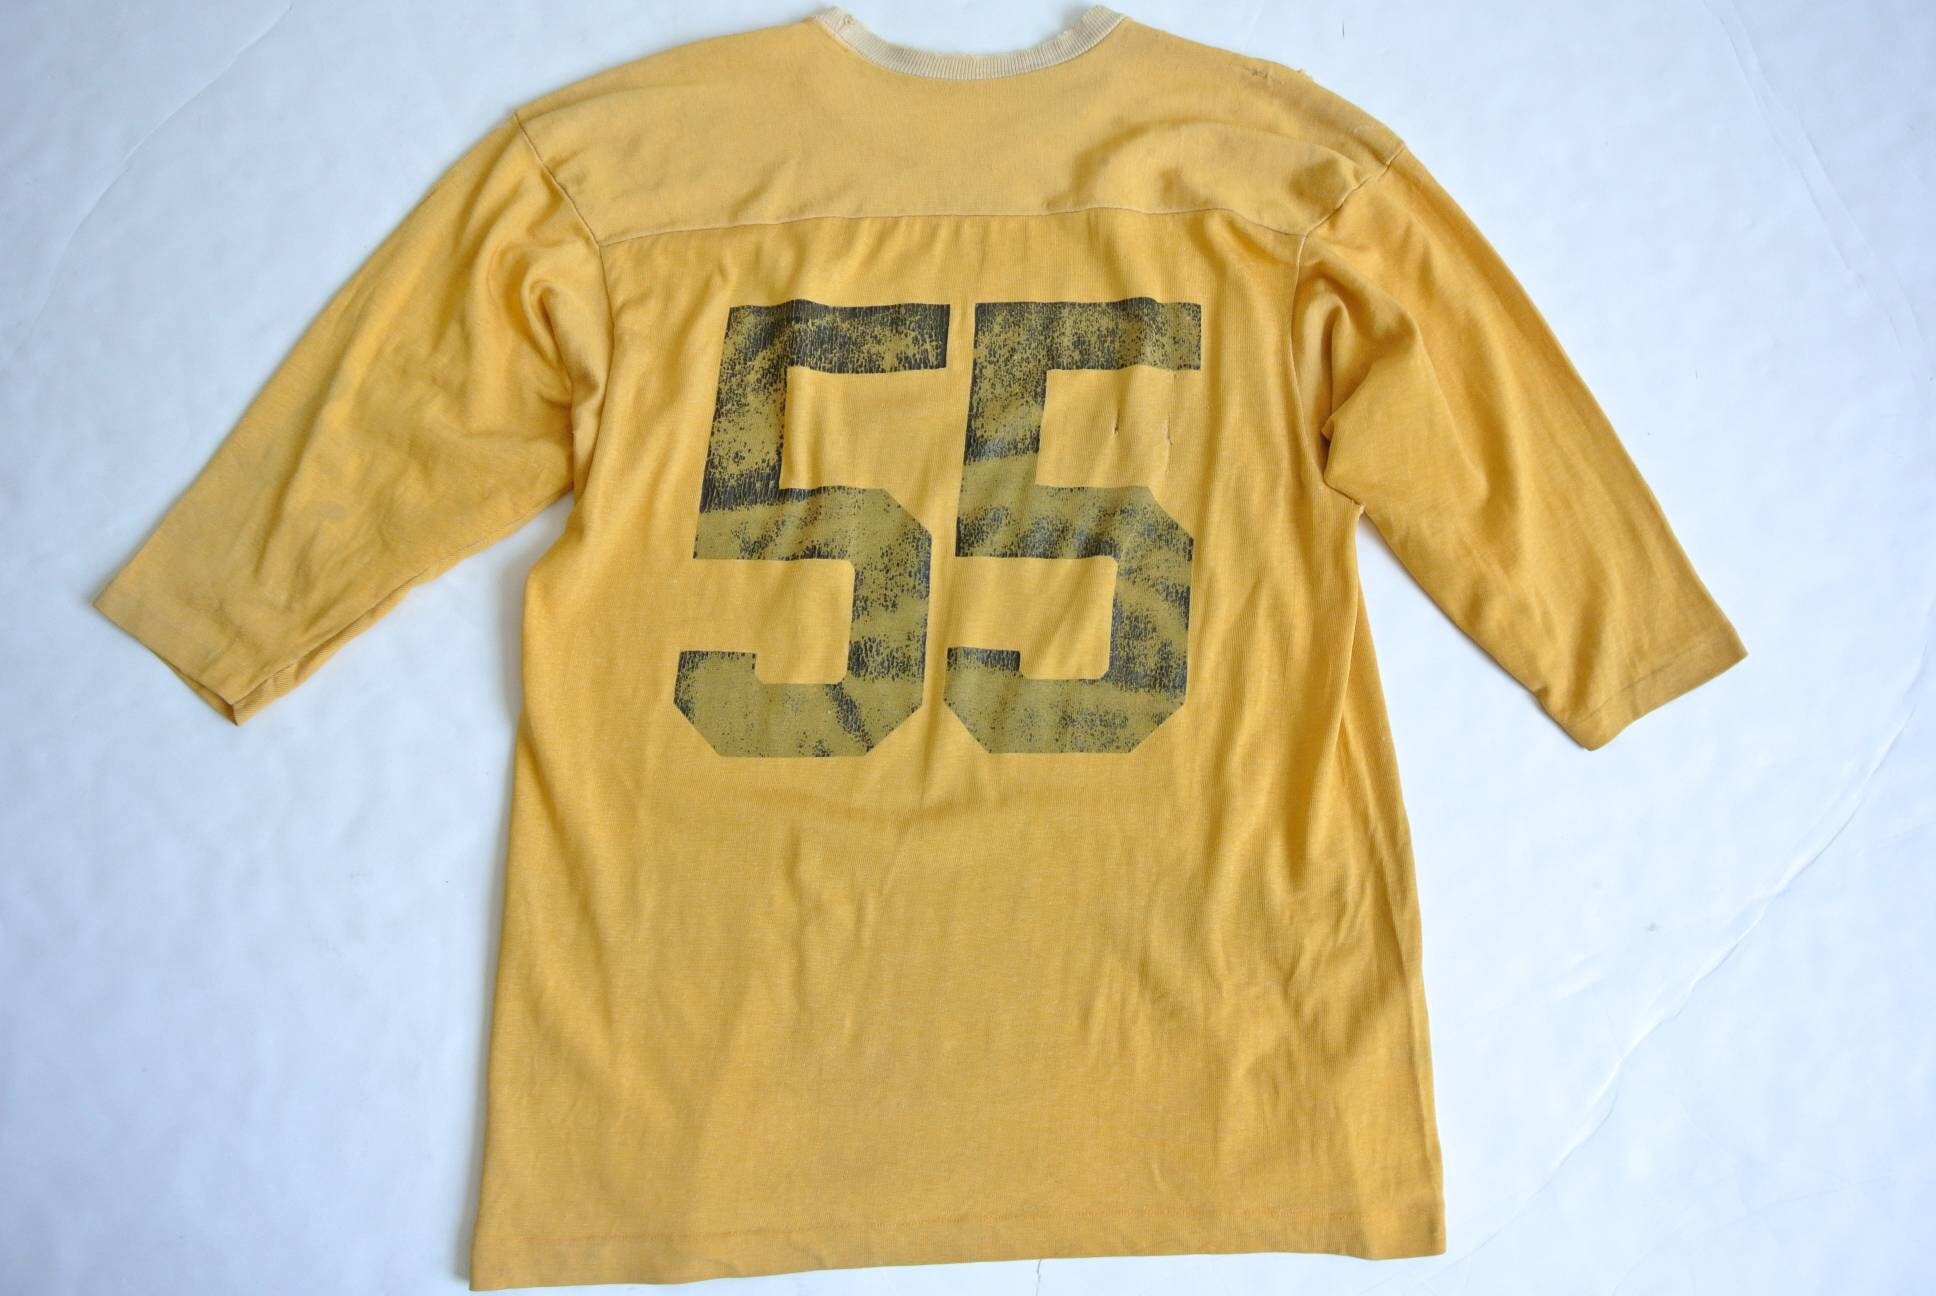 Vintage 1960's yellow distressed football jersey numbered | Etsy